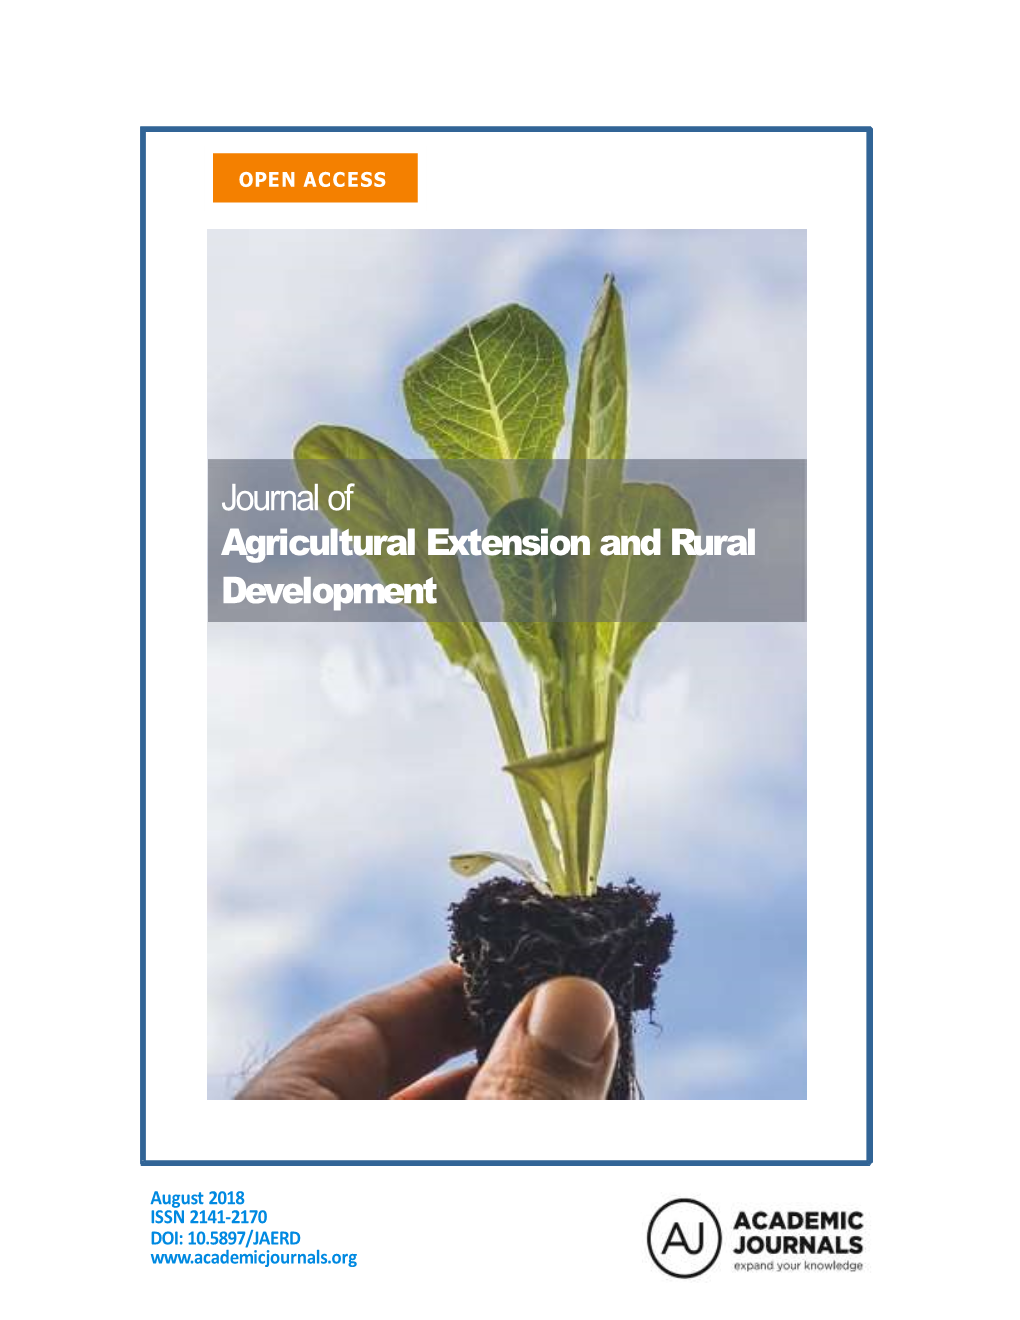 Journal of Agricultural Extension and Rural Development